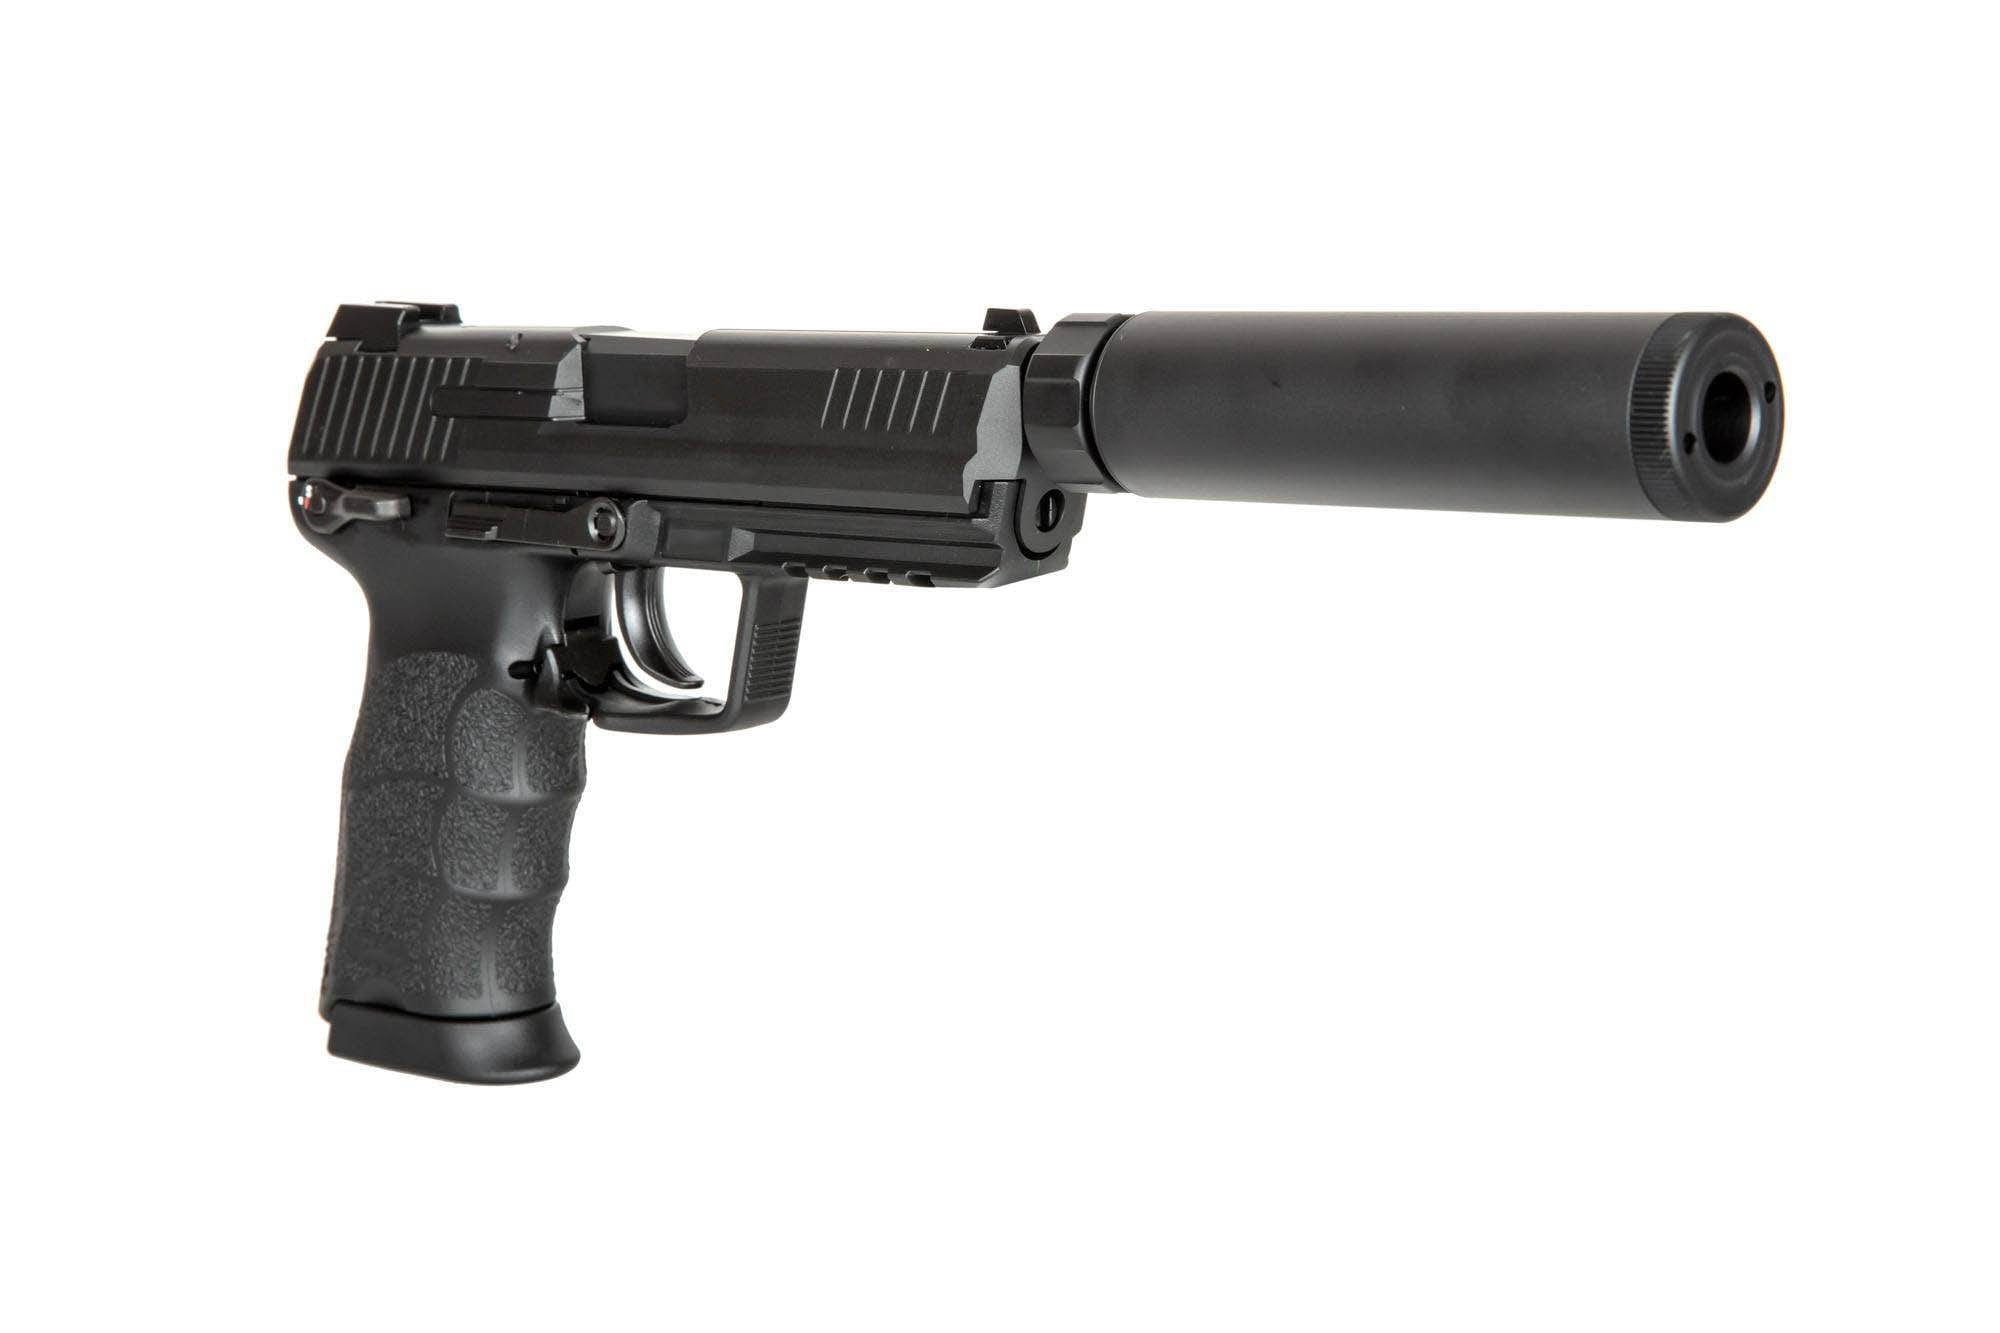 TM45 Tactical Pistol with Silencer Replica - Black by Tokyo Marui on Airsoft Mania Europe